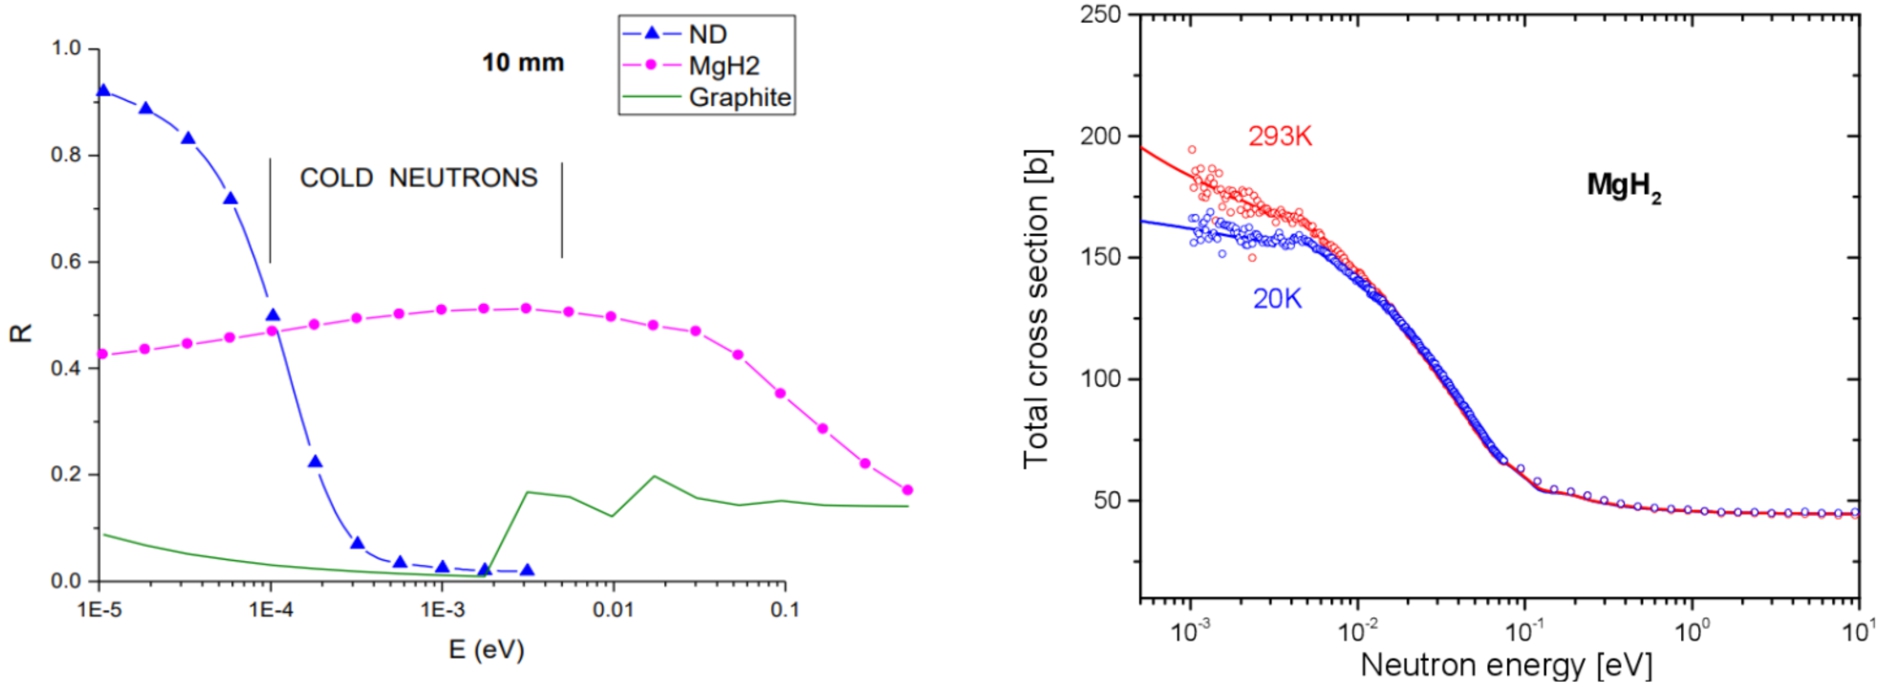 Left: reflectivity of nanodiamonds, graphite and MgH2 as a function of neutron energy [83]; right: total neutron interaction cross section of MgH2 at 20 K and 293 K [82].